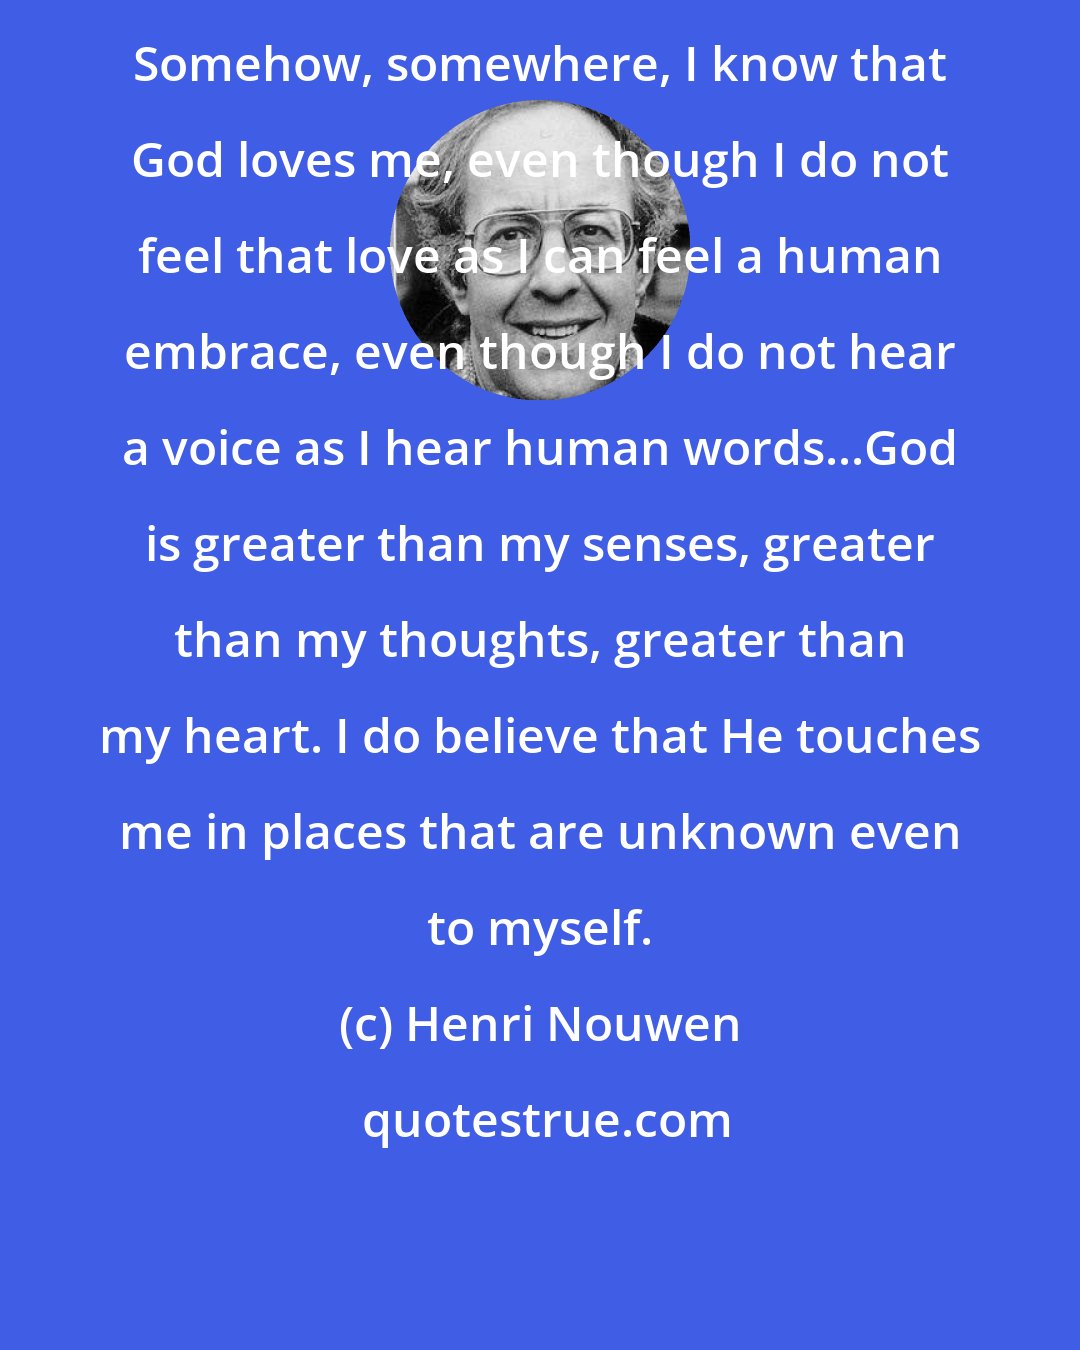 Henri Nouwen: Somehow, somewhere, I know that God loves me, even though I do not feel that love as I can feel a human embrace, even though I do not hear a voice as I hear human words...God is greater than my senses, greater than my thoughts, greater than my heart. I do believe that He touches me in places that are unknown even to myself.